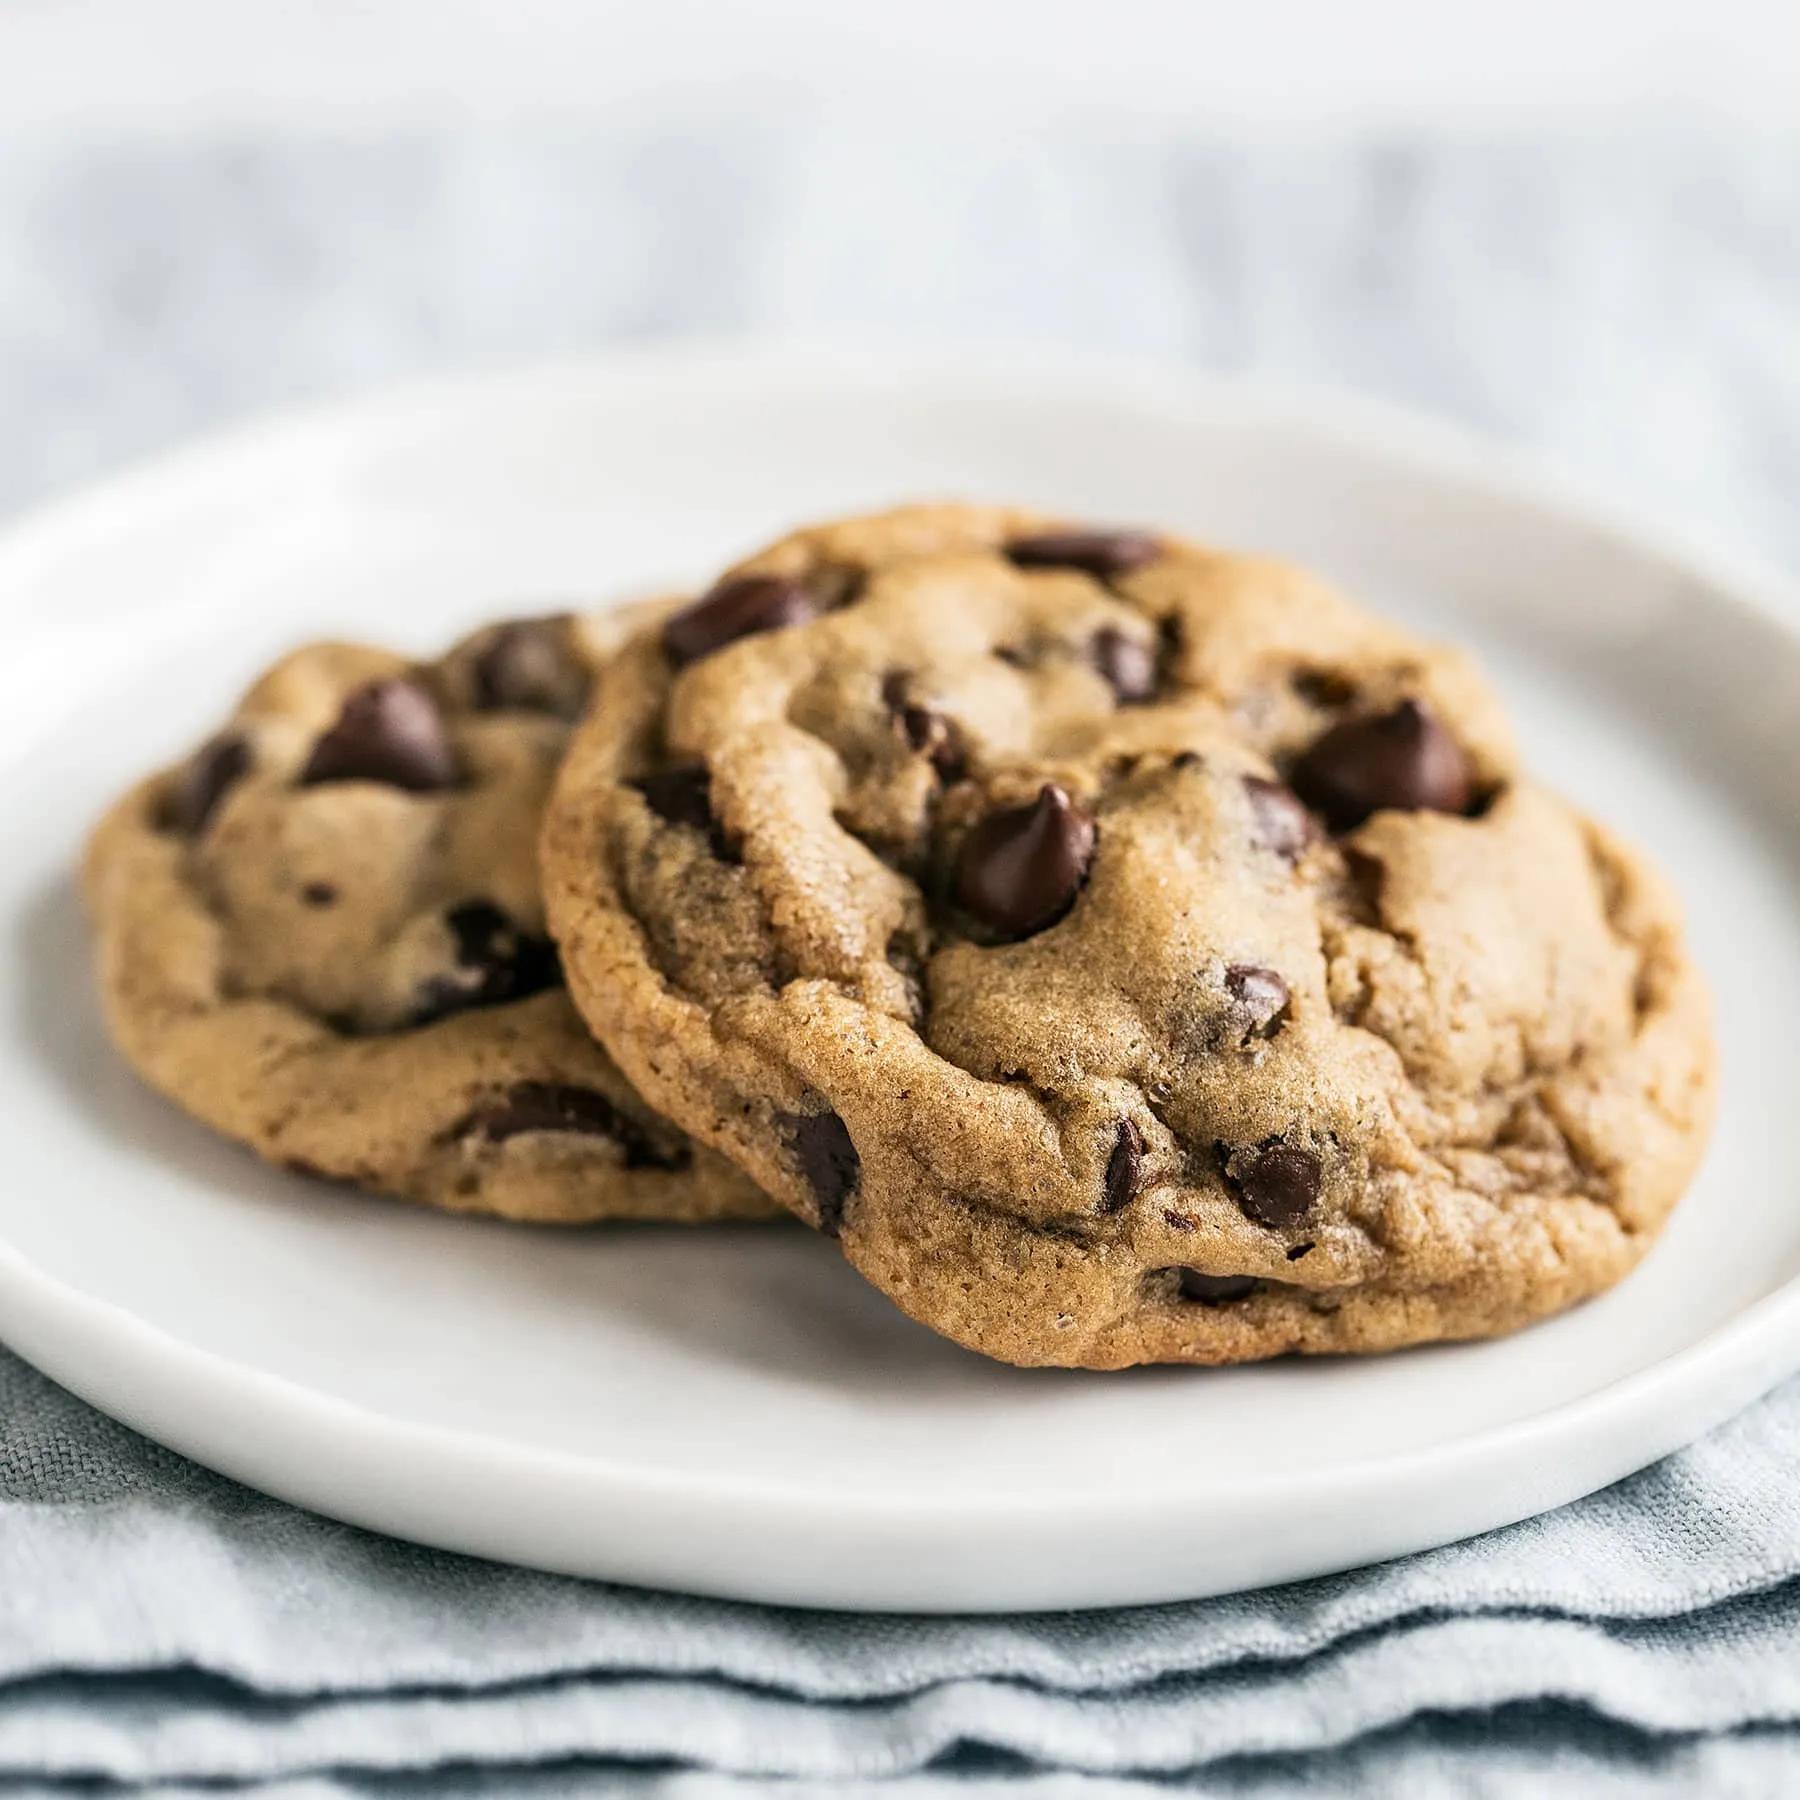 Super Chewy Chocolate Chip Cookies - Peanut Butter Recipe